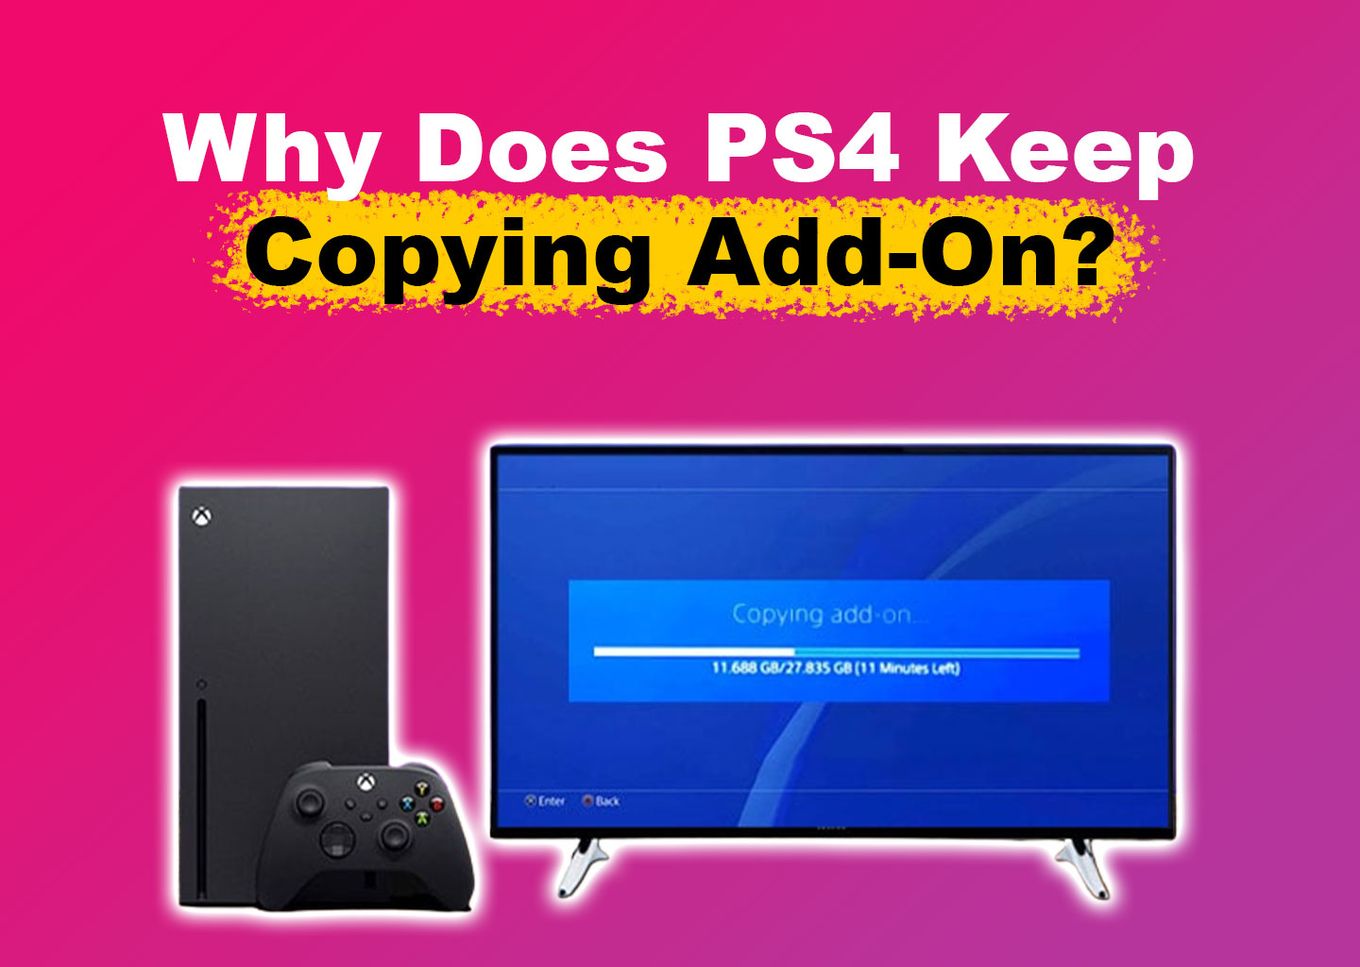 Why Does PS4 Keep Copying Add-On